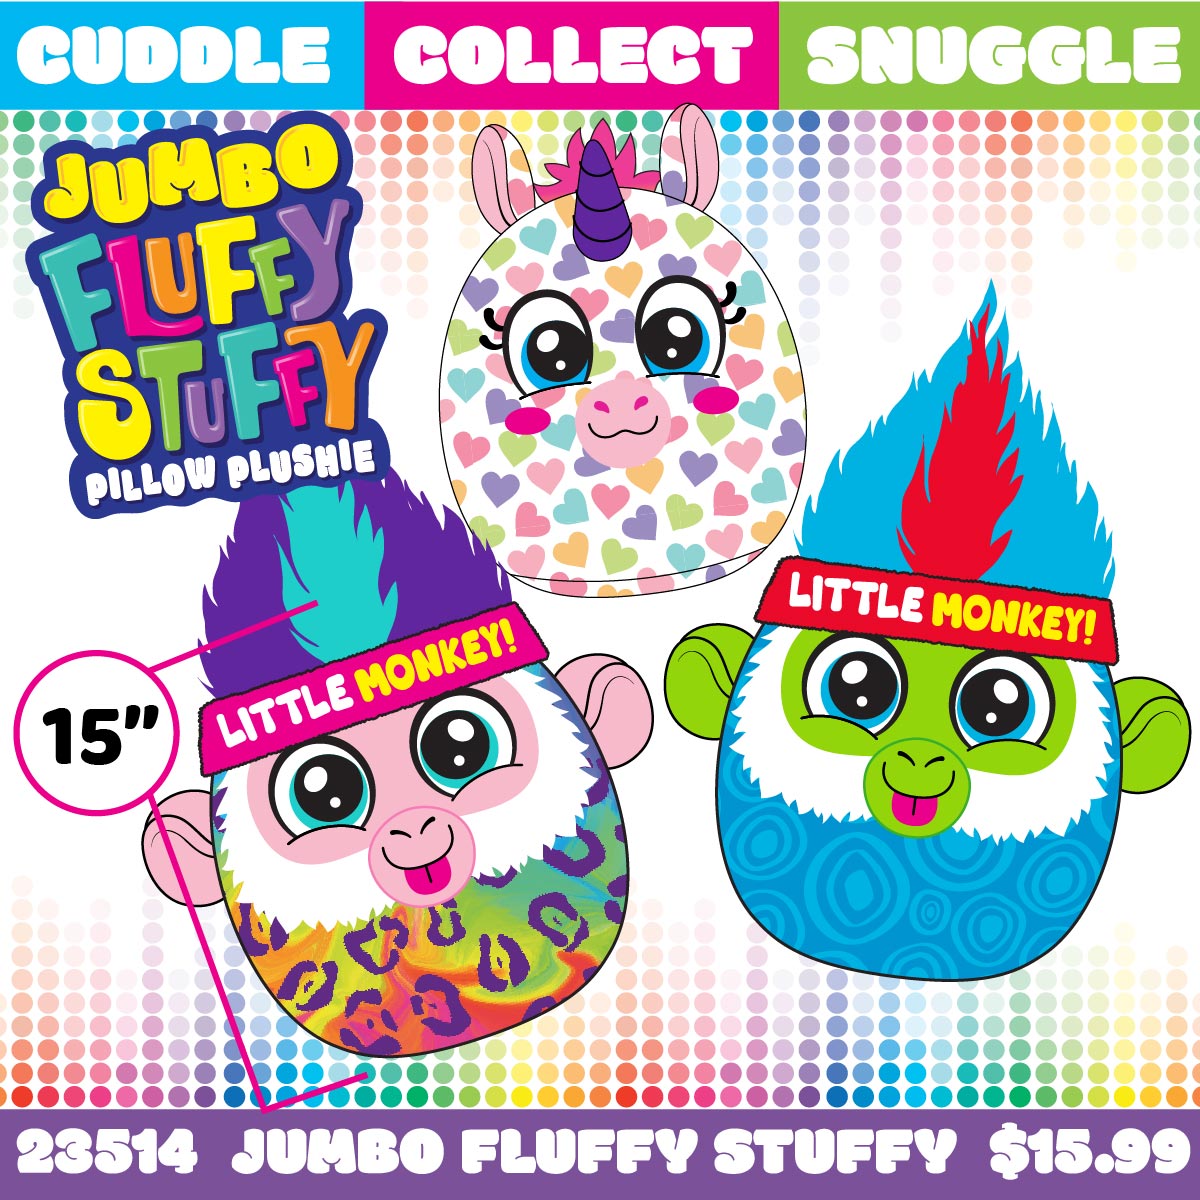 ITEM NUMBER 023514L JUMBO FLUFFY STUFFY PILLOW PLUSHIE - STORE SURPLUS NO DISPLAY 6 PIECES PER PACK